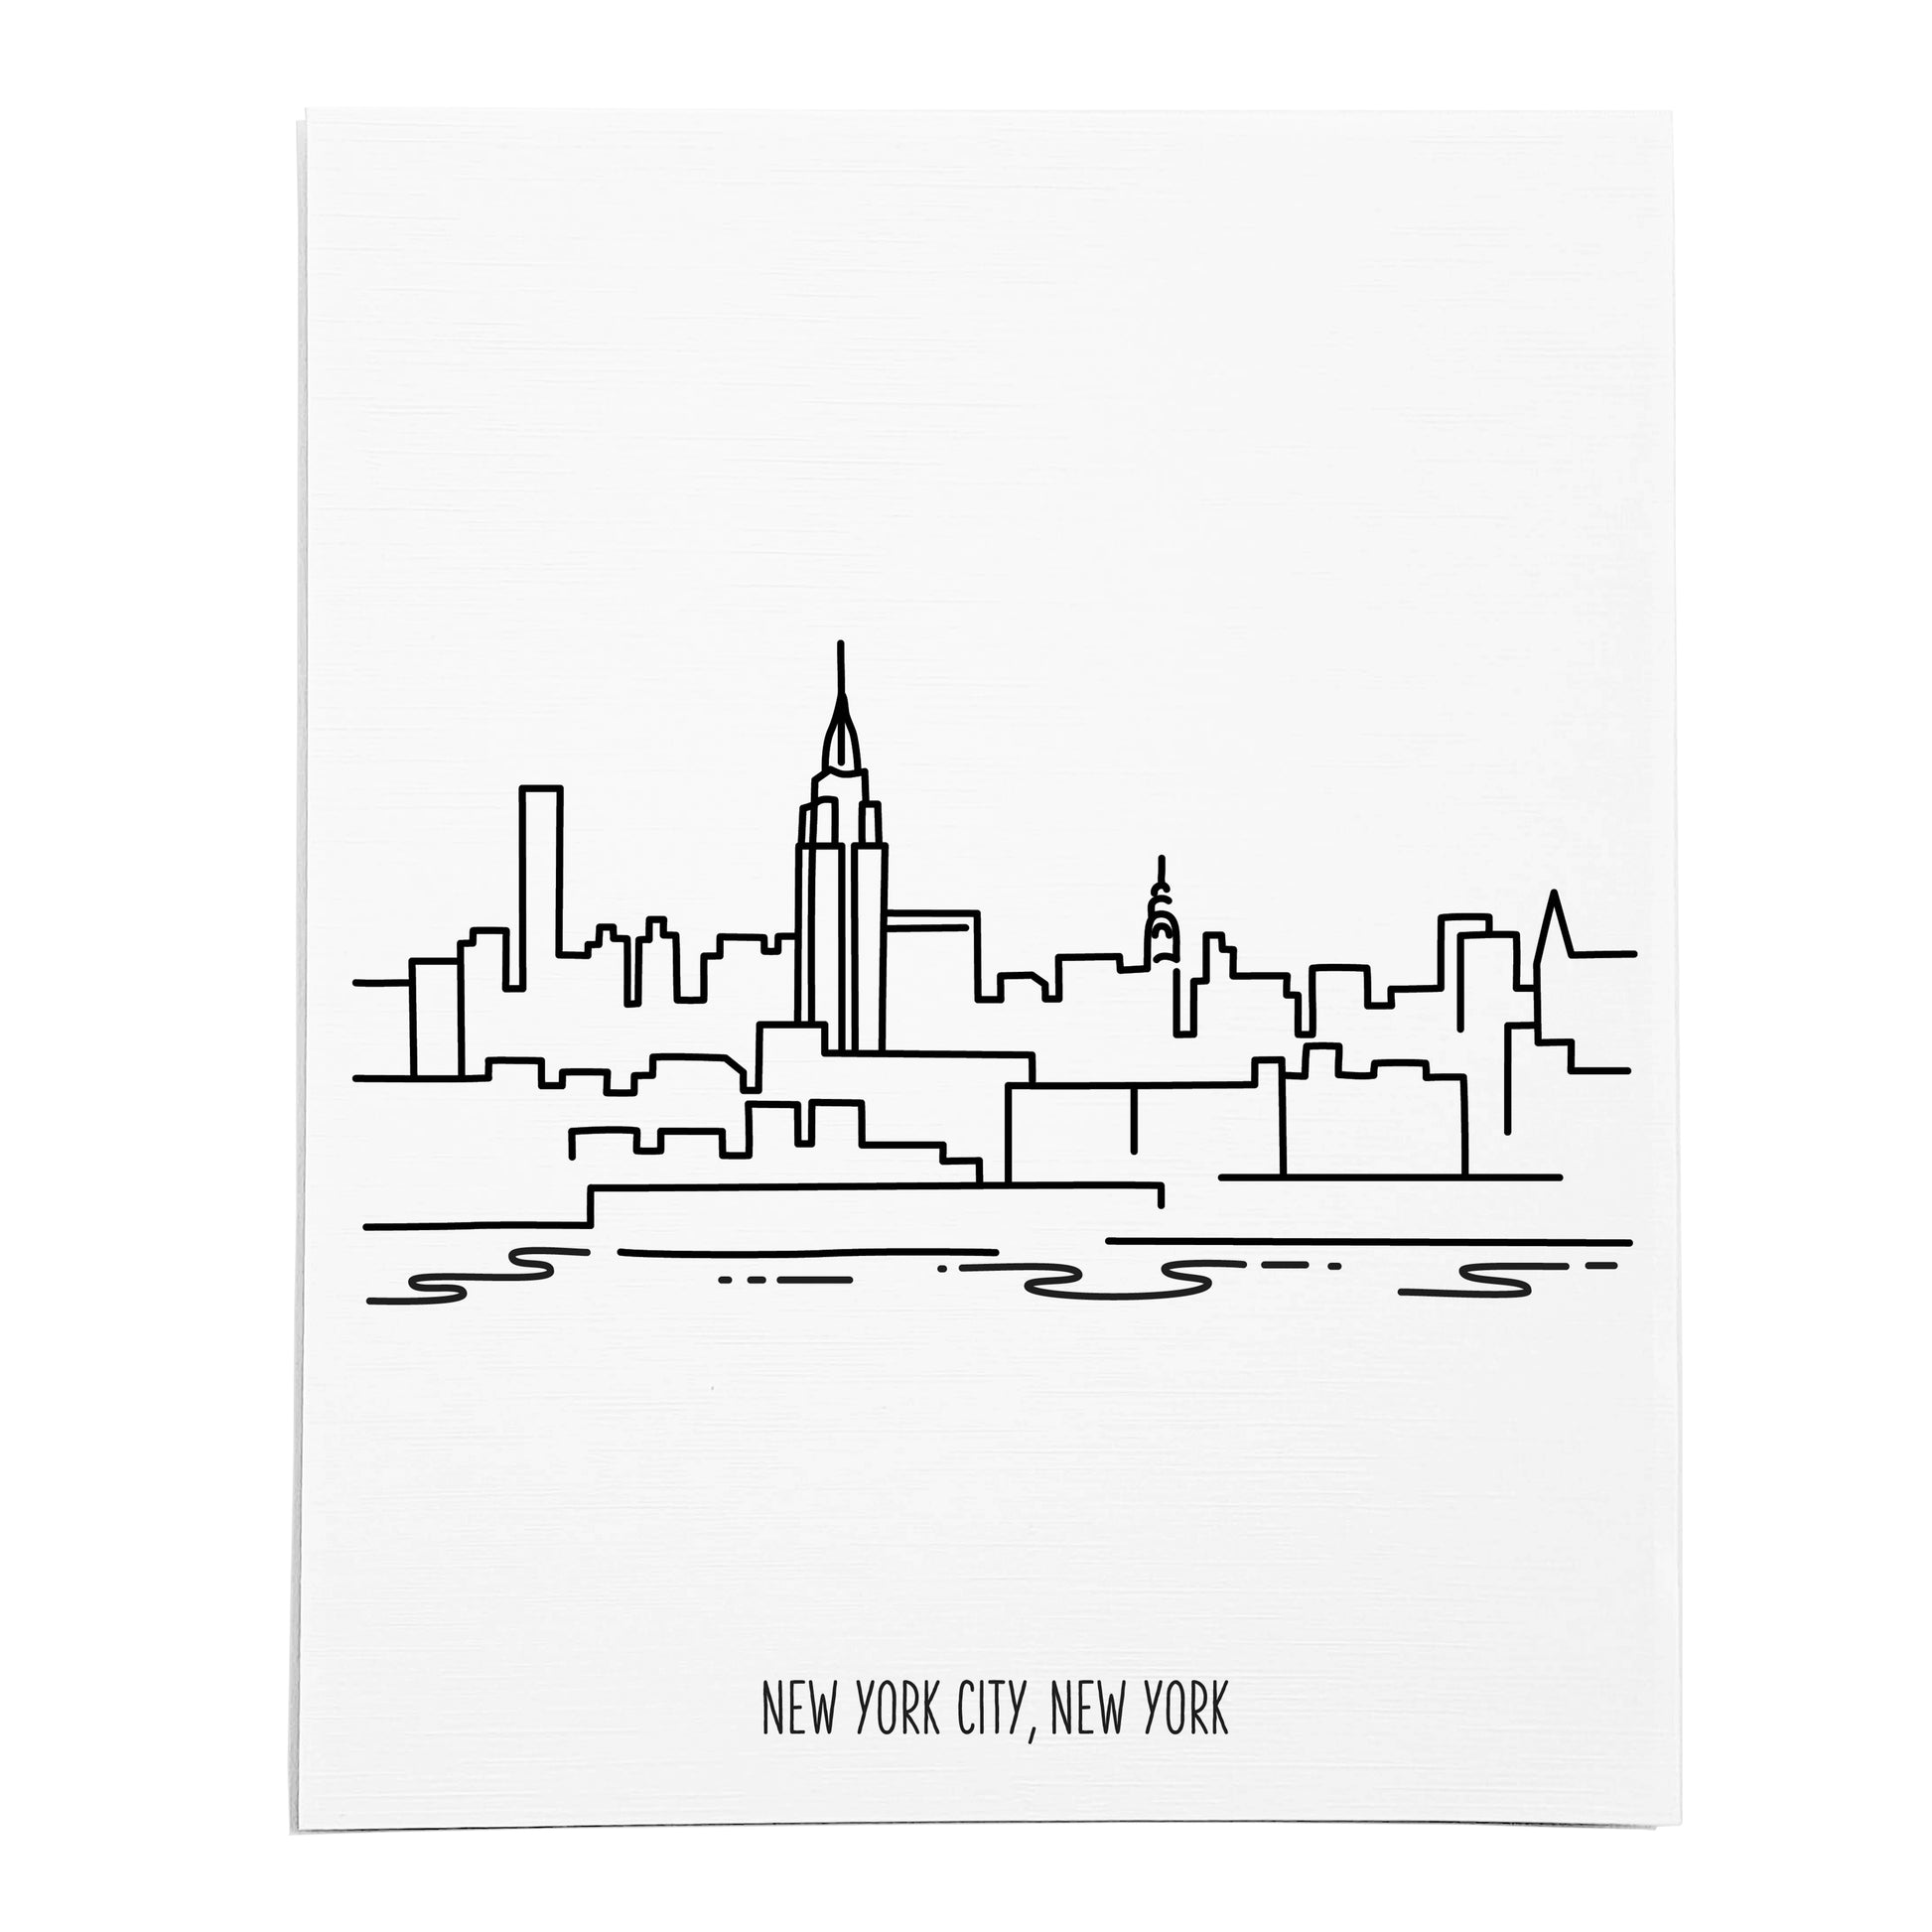 An art print featuring a line drawing of the New York City Skyline on white linen paper